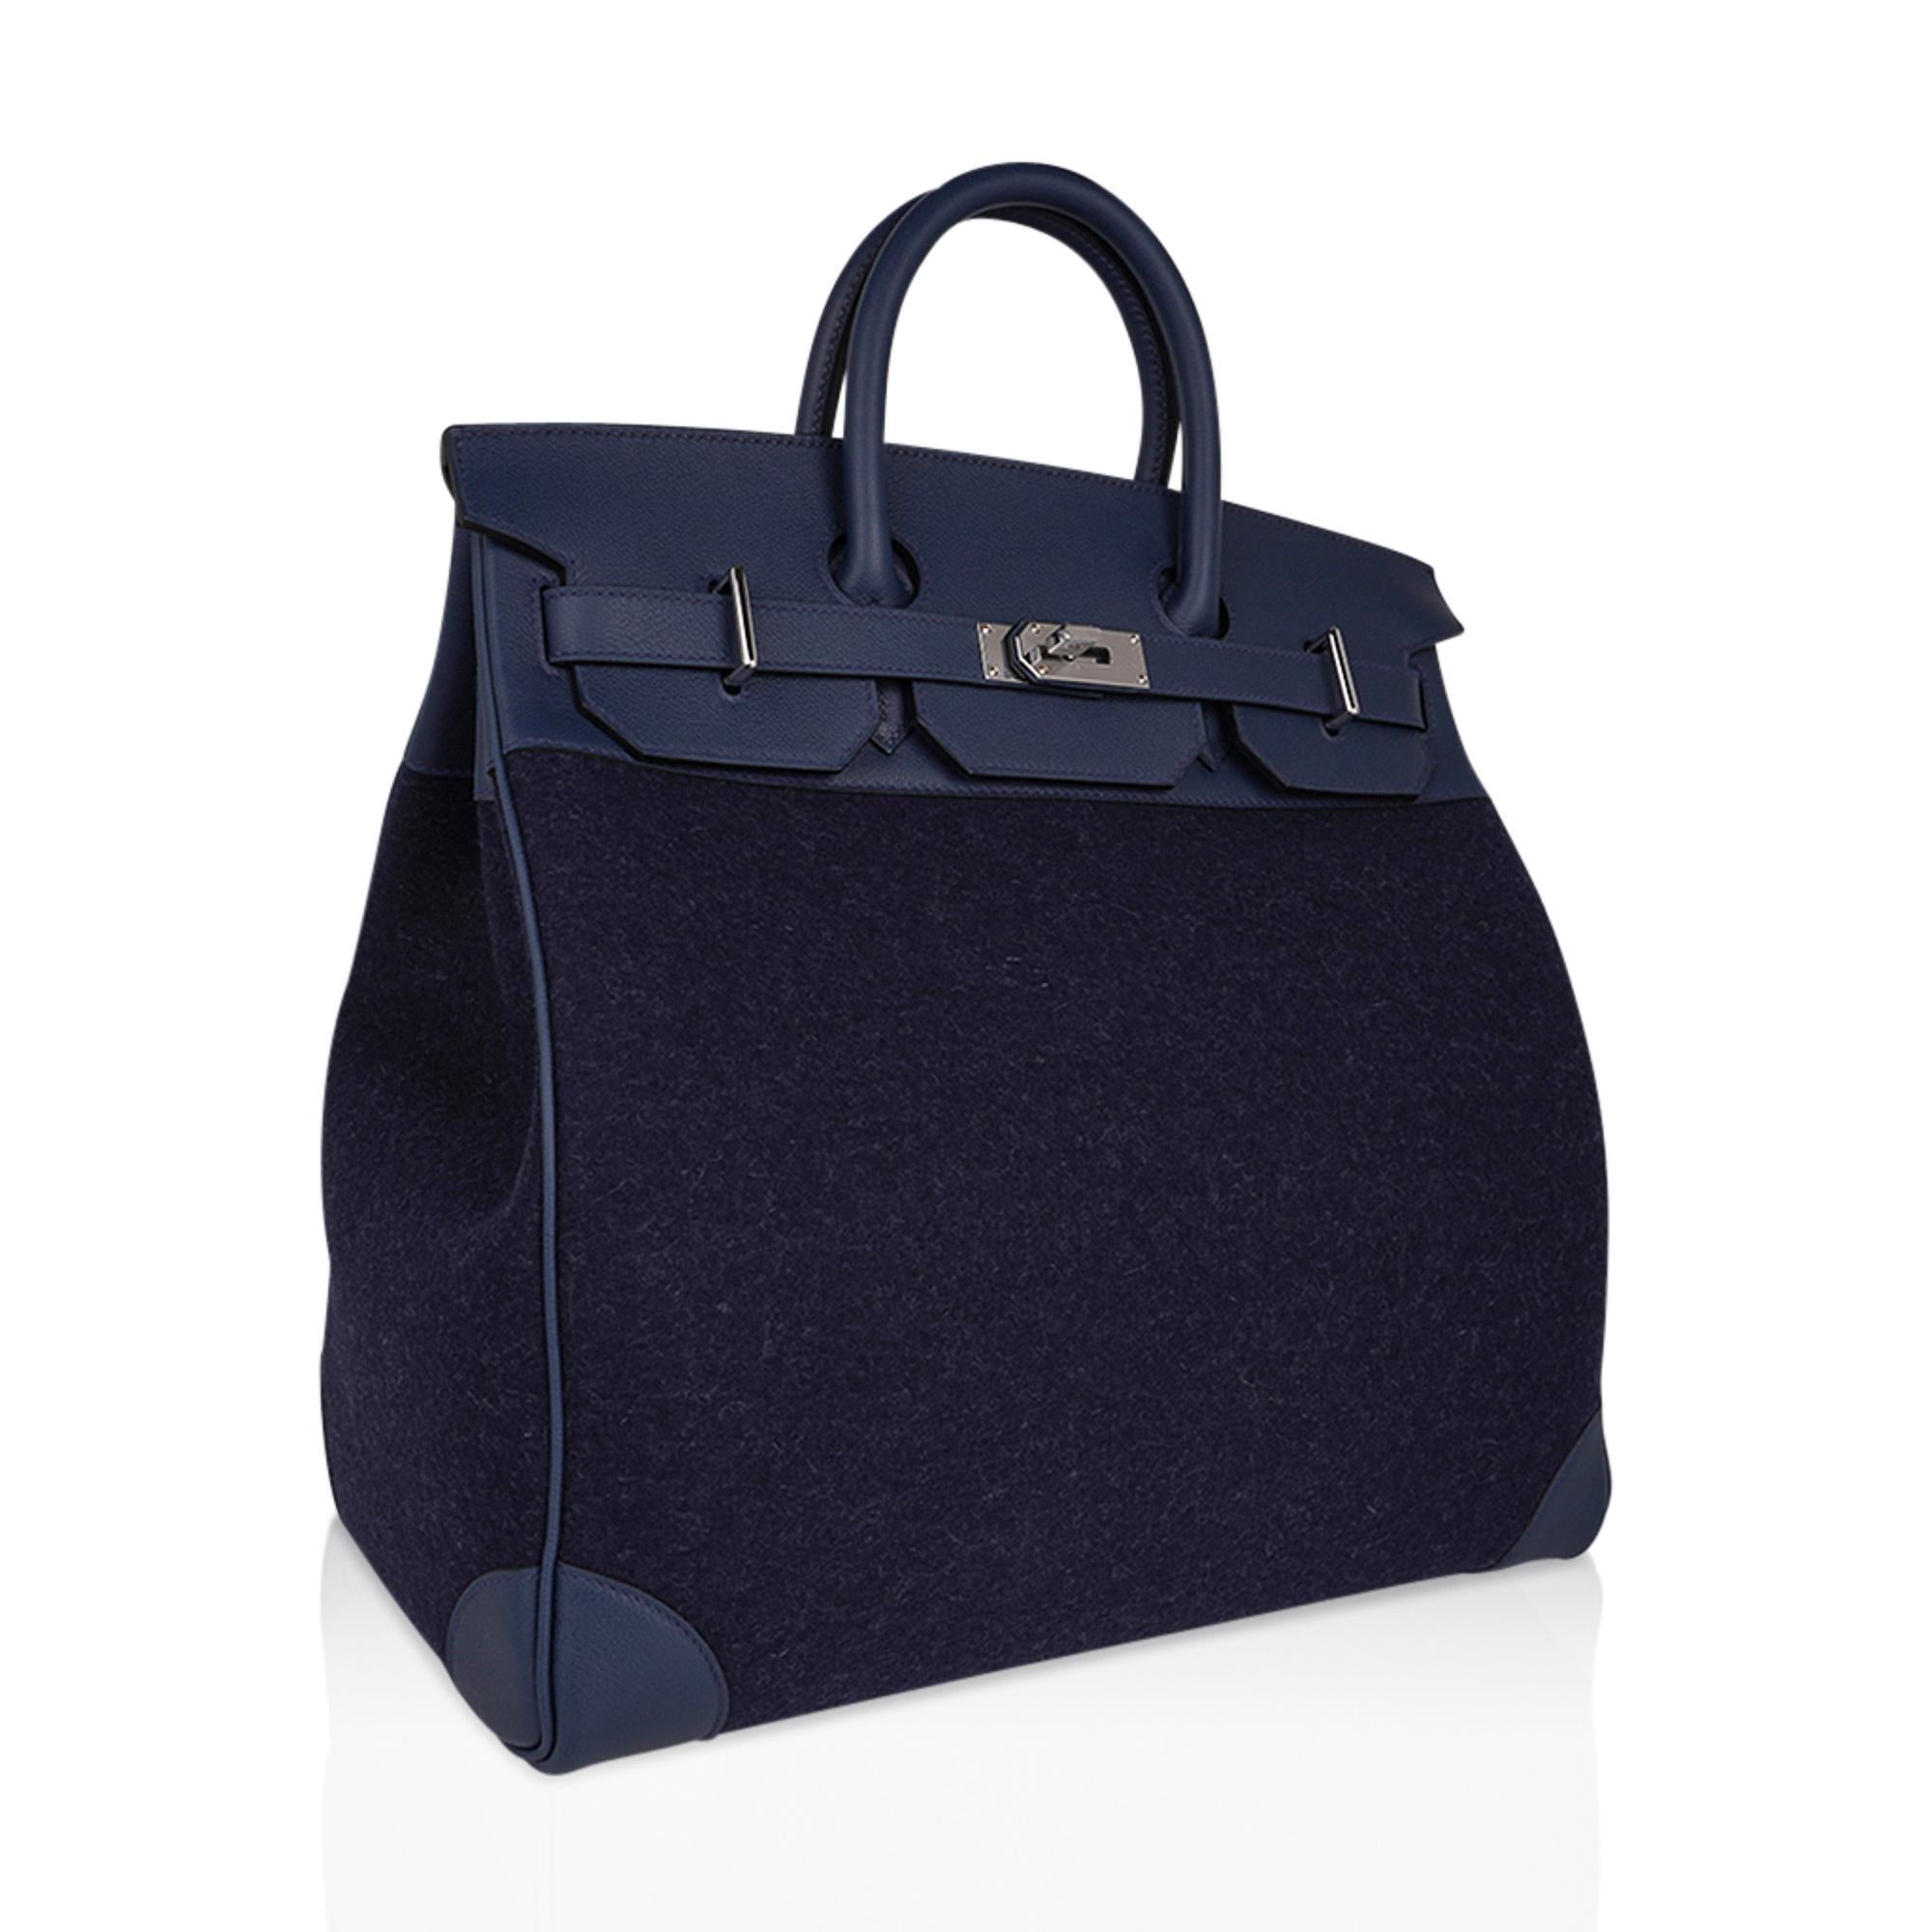 Mightychic offers a rare limited edition Hermes HAC 40 bag featured in Blue Nuit Todoo Feutre (Wool) and Blue de Malte Evercolor leather.
A chic and masculine combination for this rare Hermes classic bag.
Beautiful saturated Blue this tote bag is